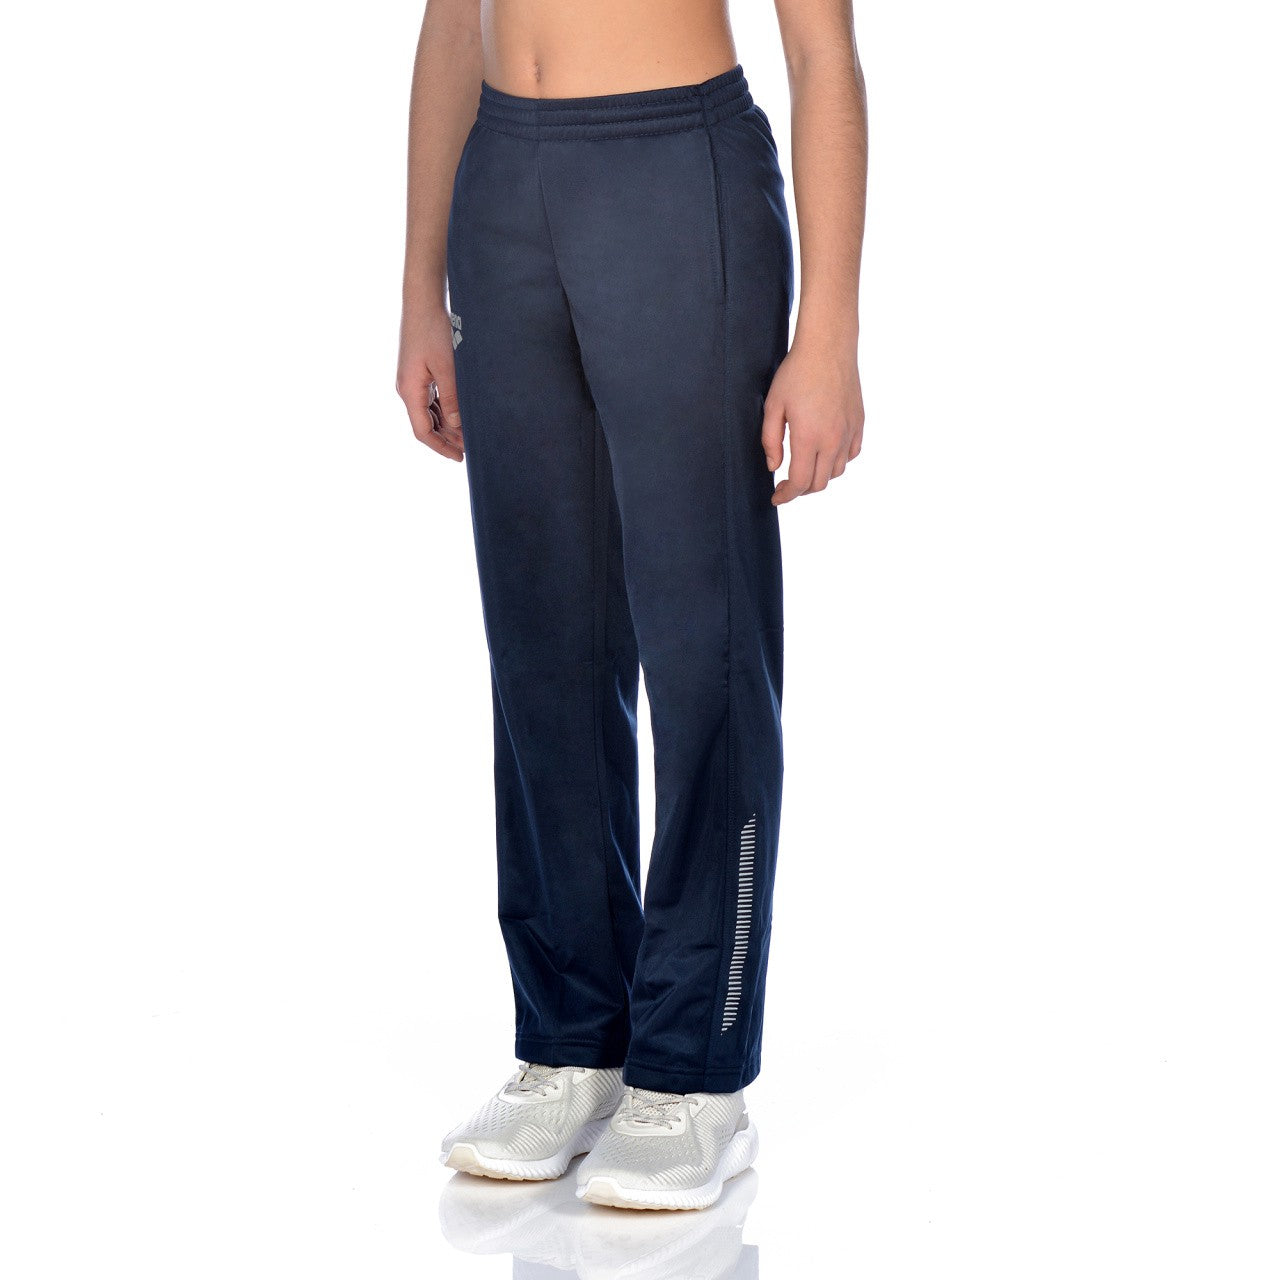 Jr Tl Knitted Poly Pant navy